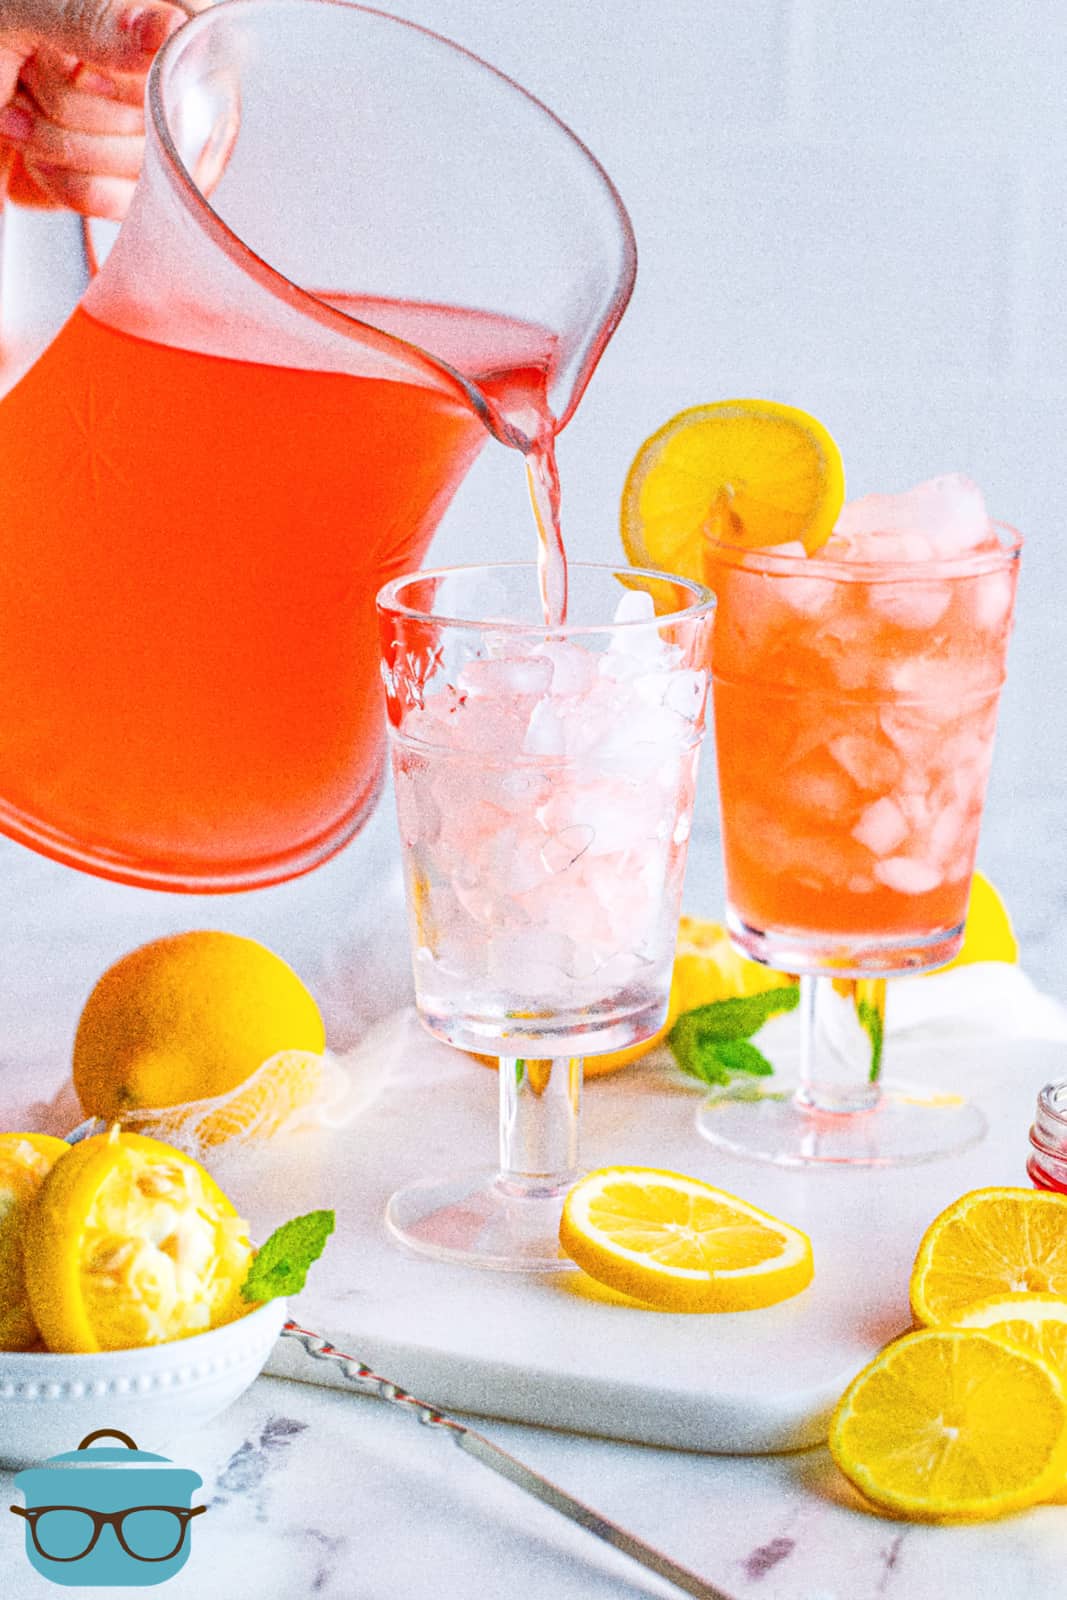 Pitcher pouring Homemade Pink Lemonade into glass with ice.